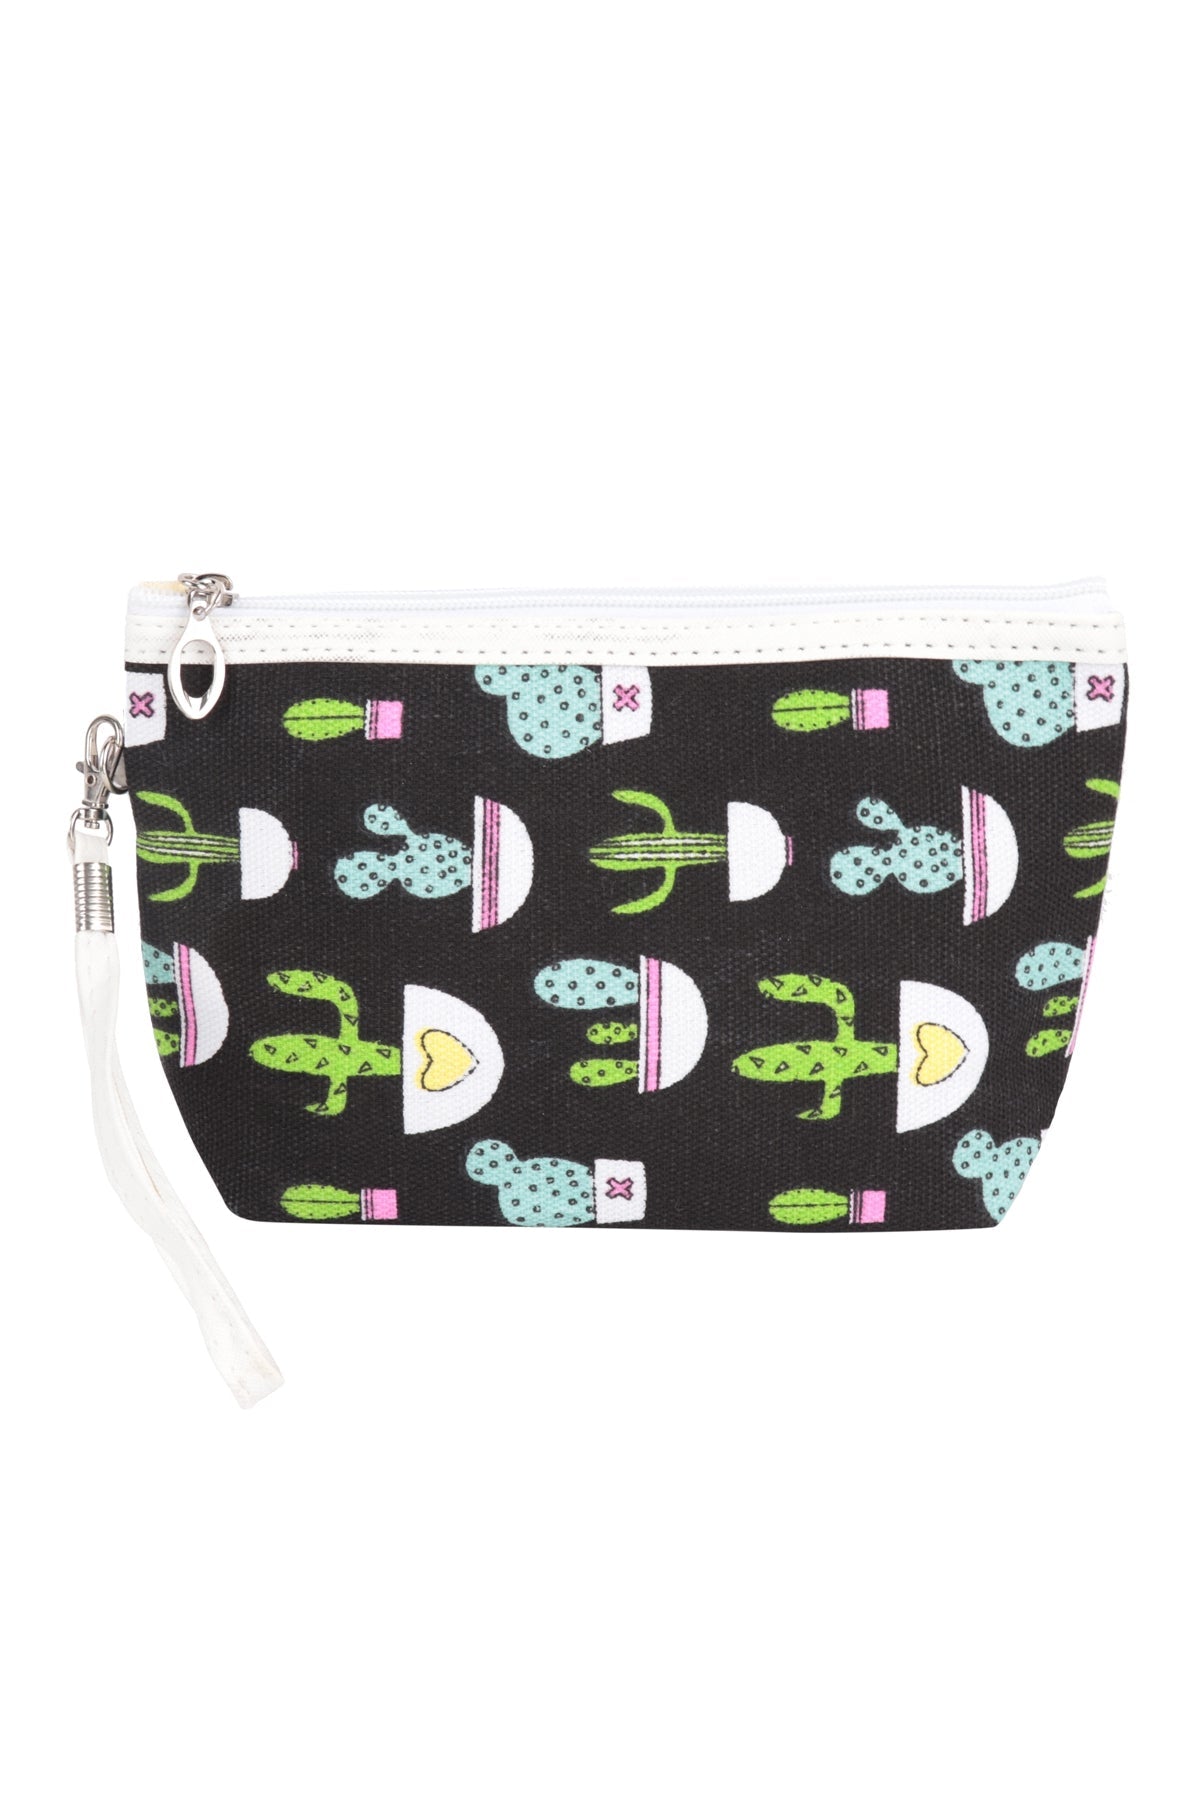 CACTUS PRINT COSMETIC POUCH BAG W/ WRISTLET (NOW $1.00 ONLY!)